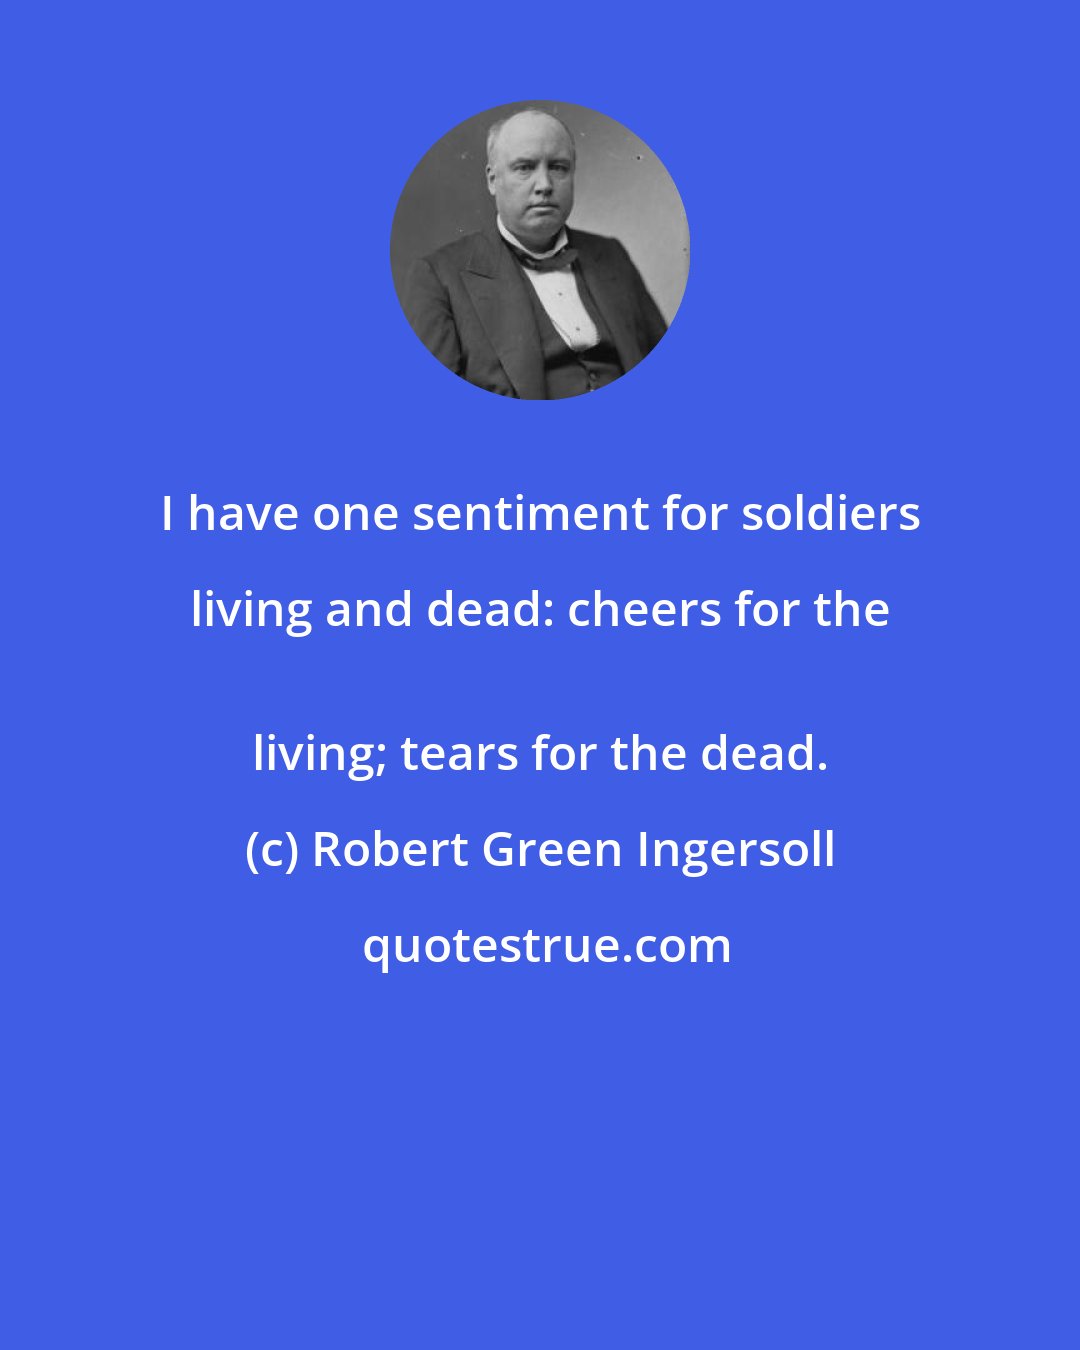 Robert Green Ingersoll: I have one sentiment for soldiers living and dead: cheers for the 
 living; tears for the dead.